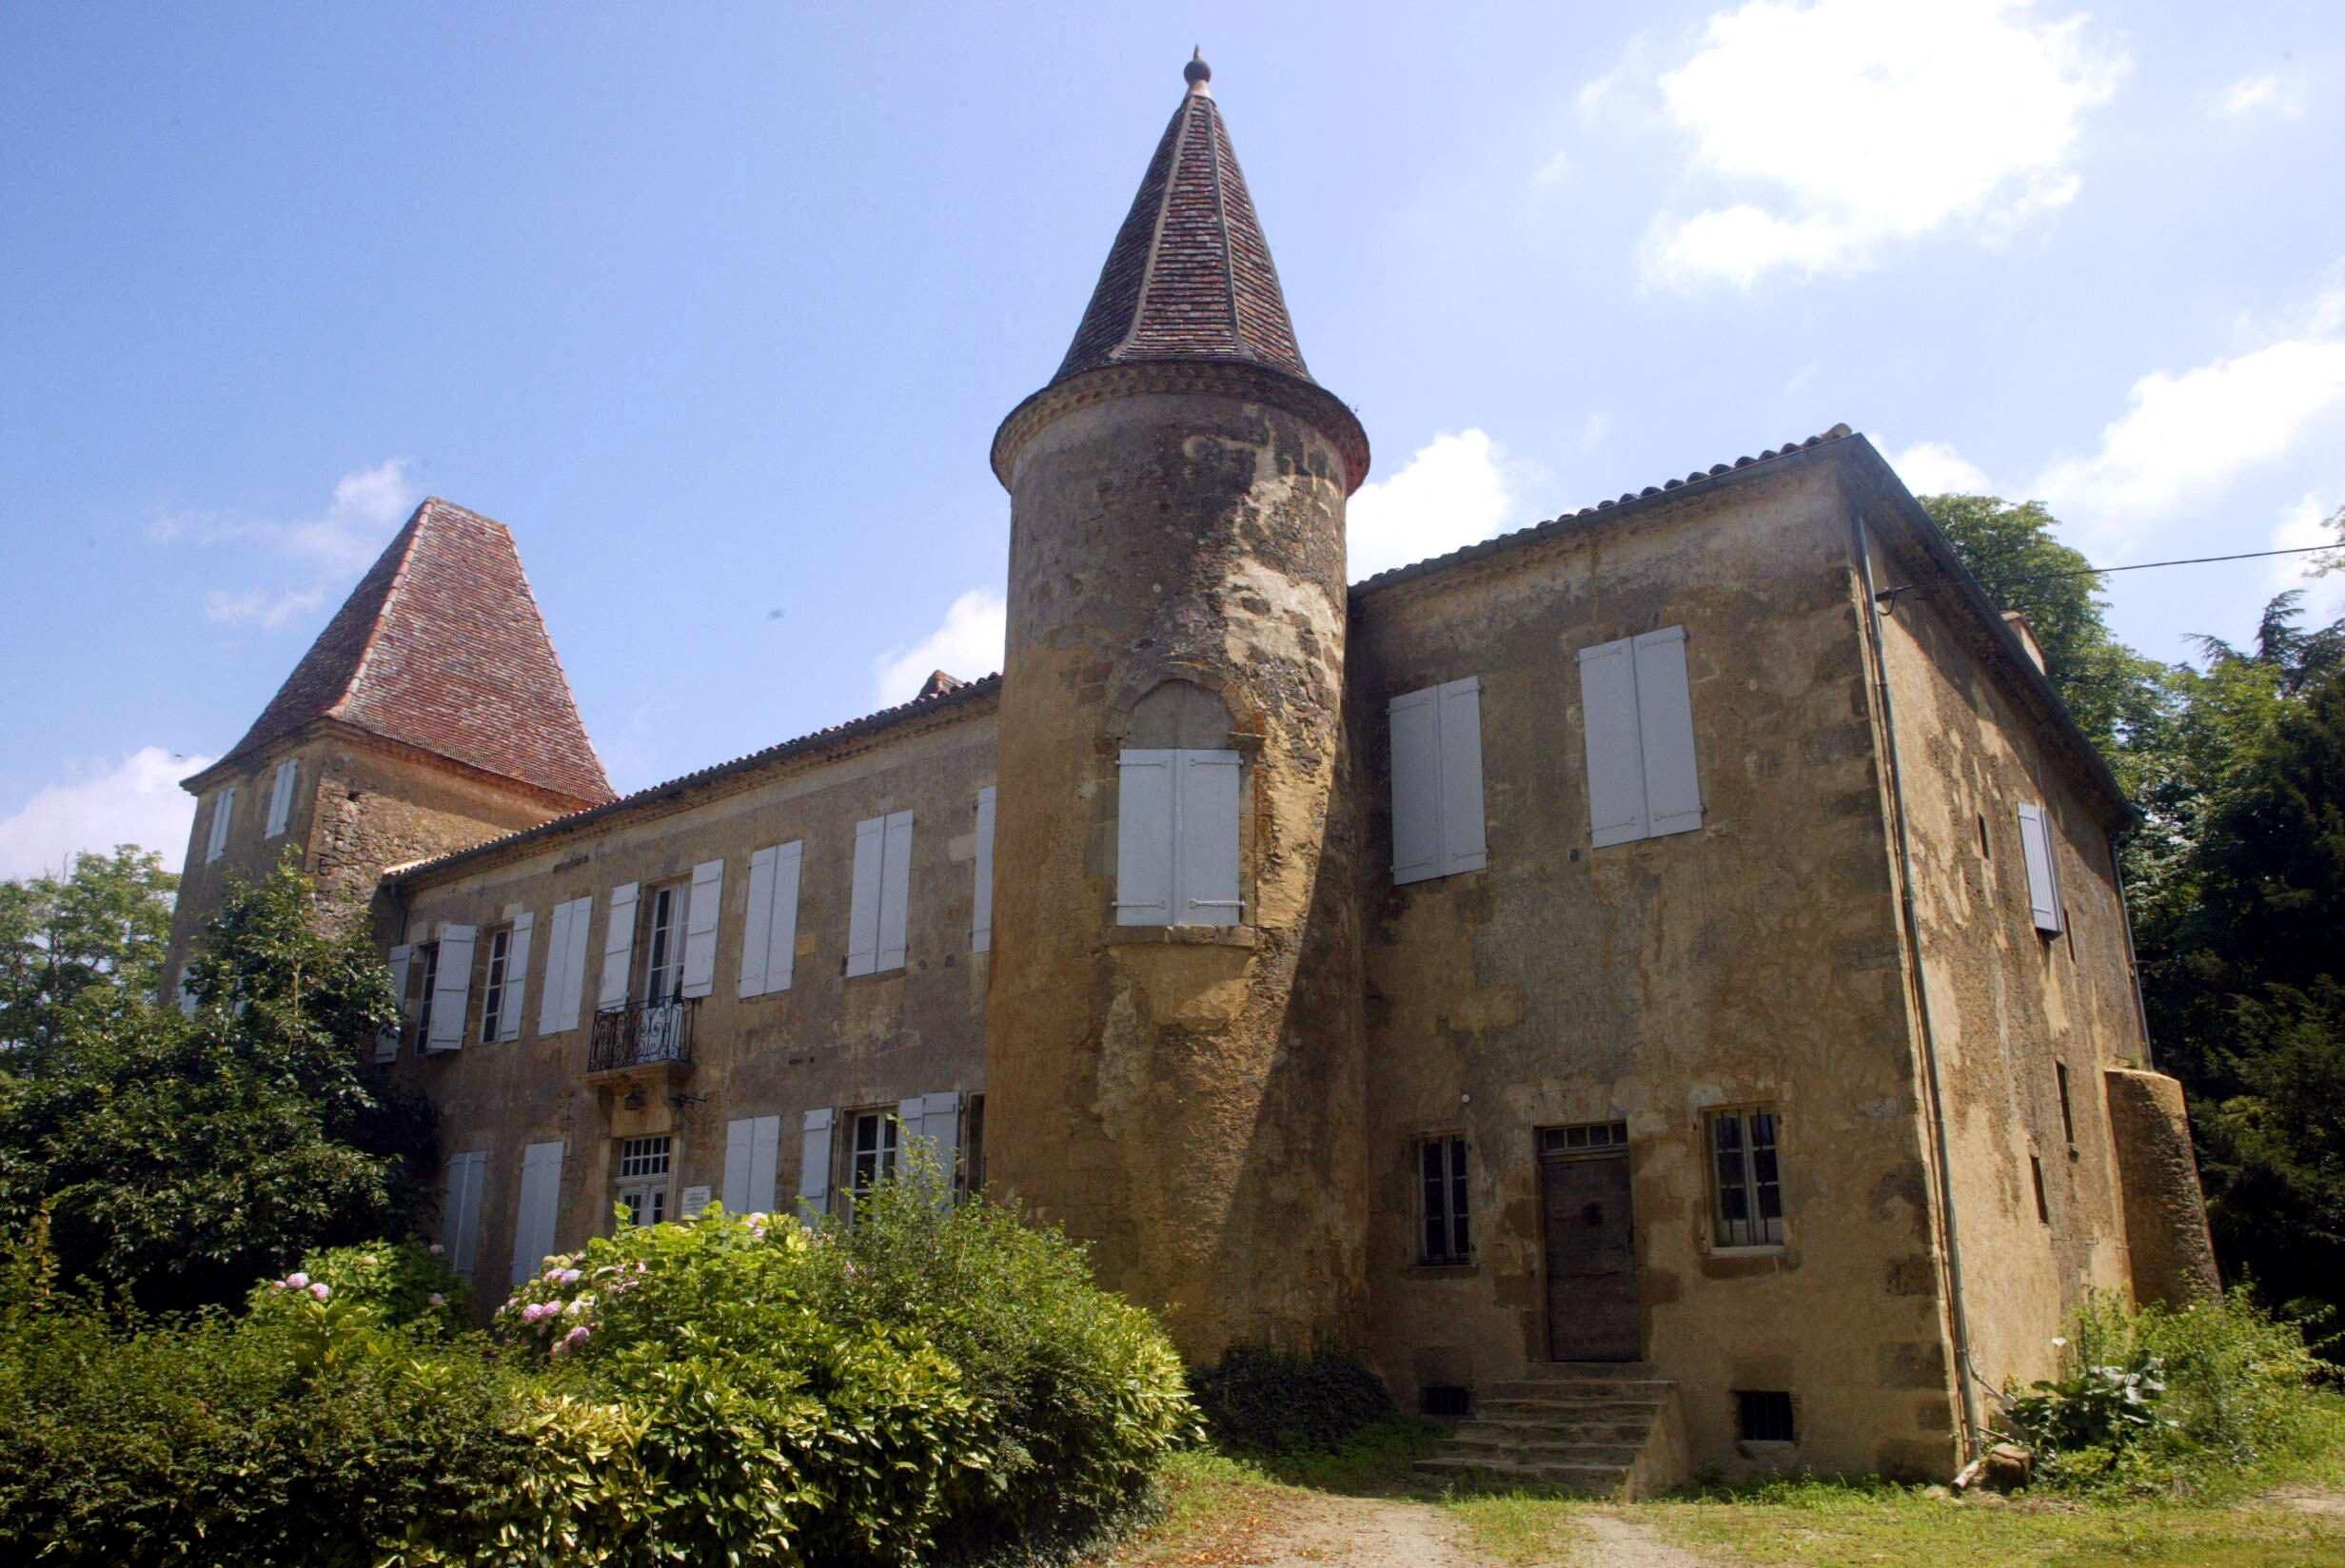 (FILES) A July 17 2002 view of the Chateau de Castelmore, in the village of Lupiac. The future of the Ch�teau de d'Artagnan in Lupiac, Gers, is at the heart of a duel between a private buyer and local authorities worried about losing a property they dream of transforming into a tourist and cultural attraction. (Photo by Nathalie SAINT-AFFRE / AFP)